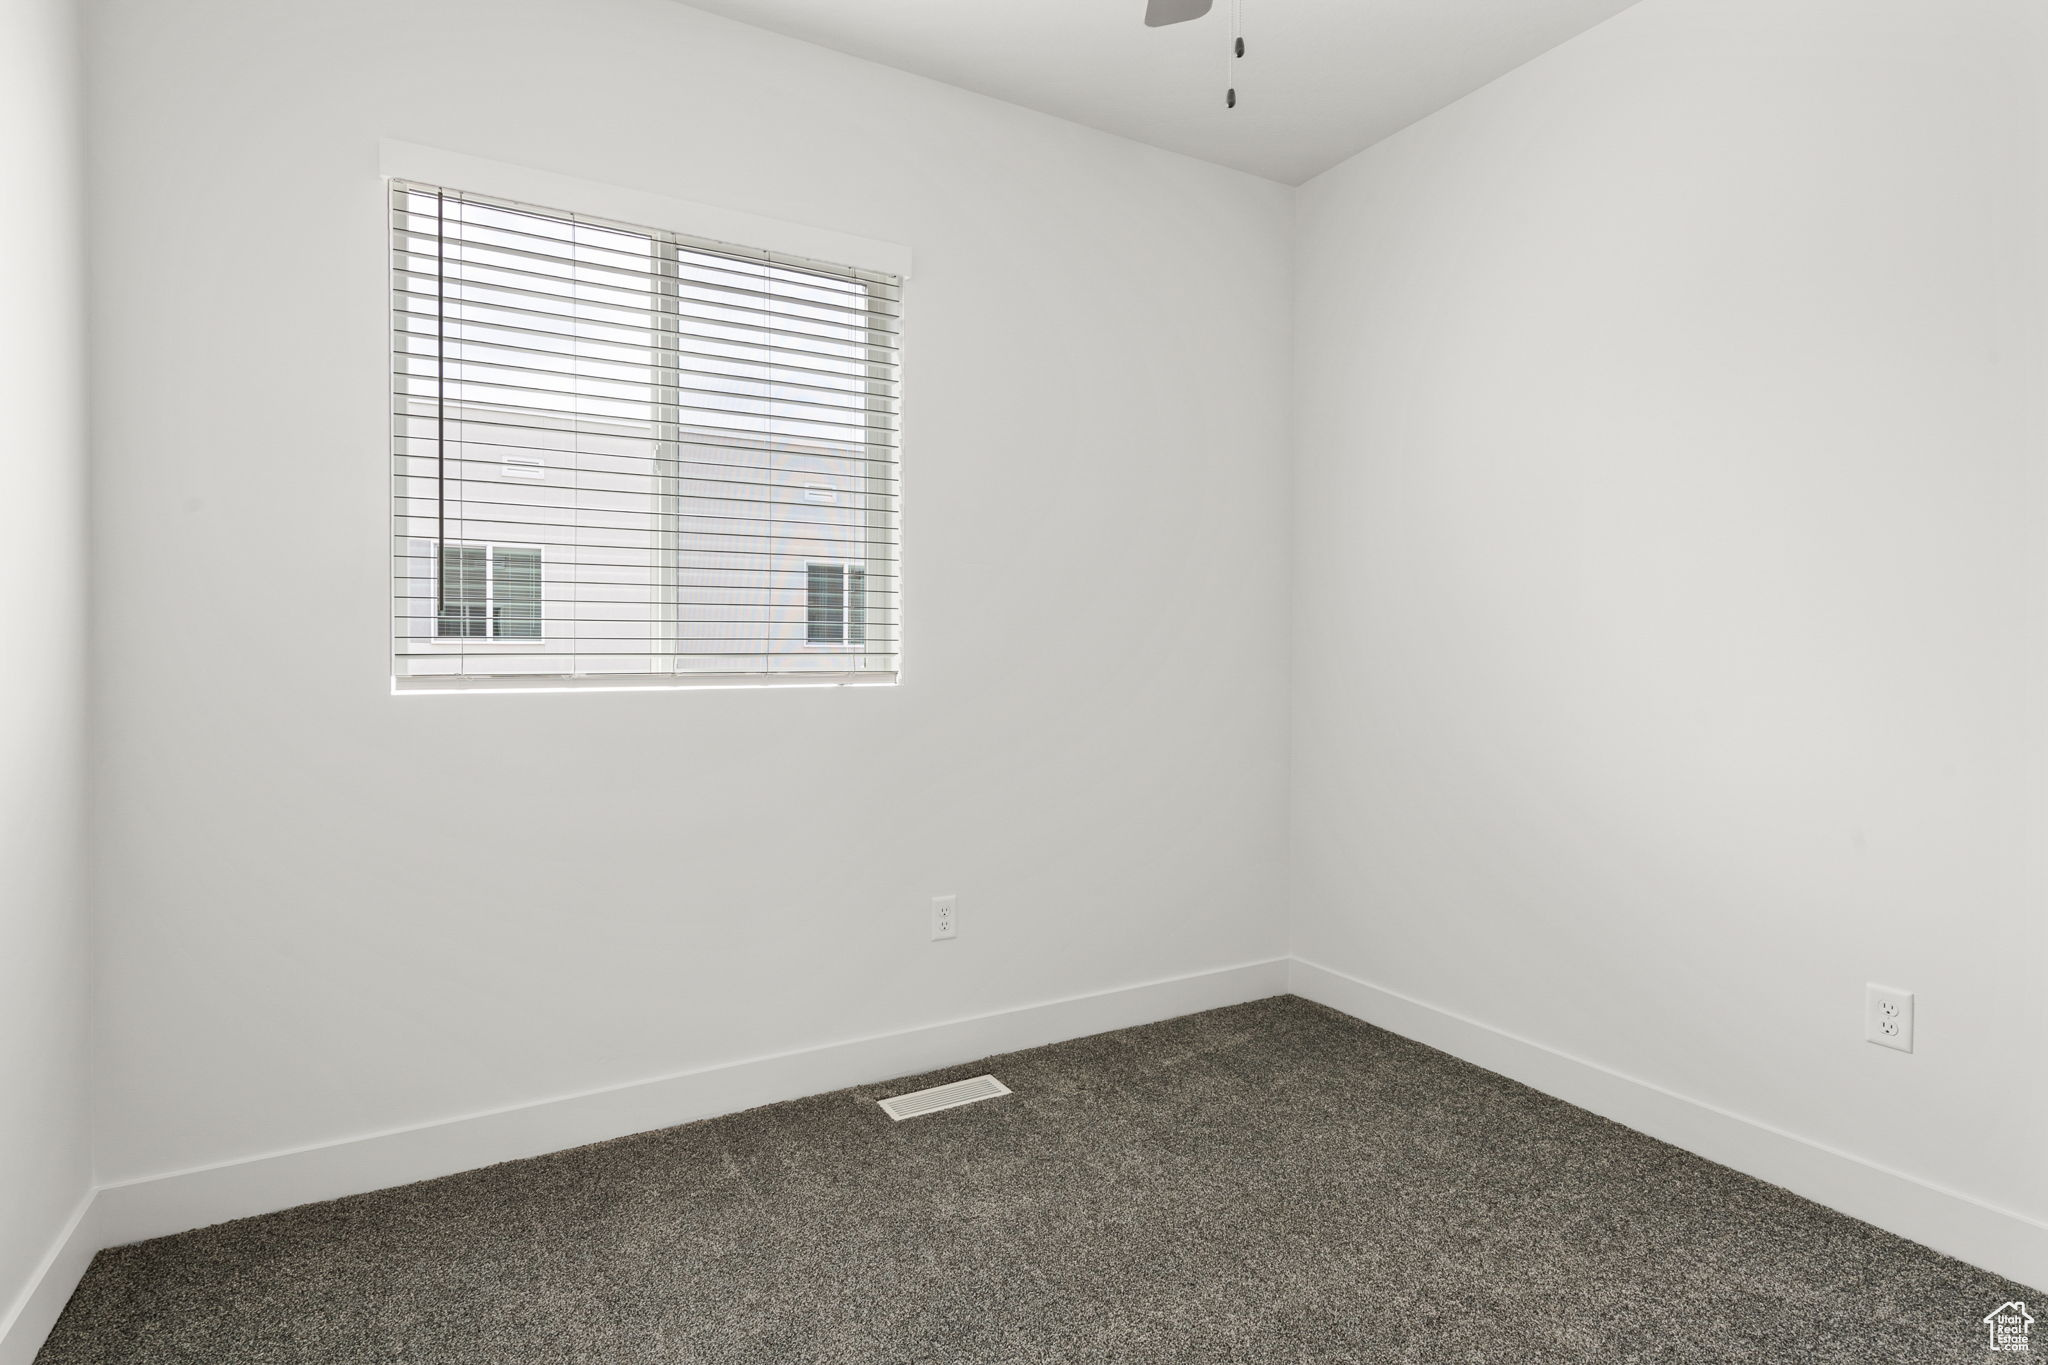 Empty room with dark colored carpet and ceiling fan